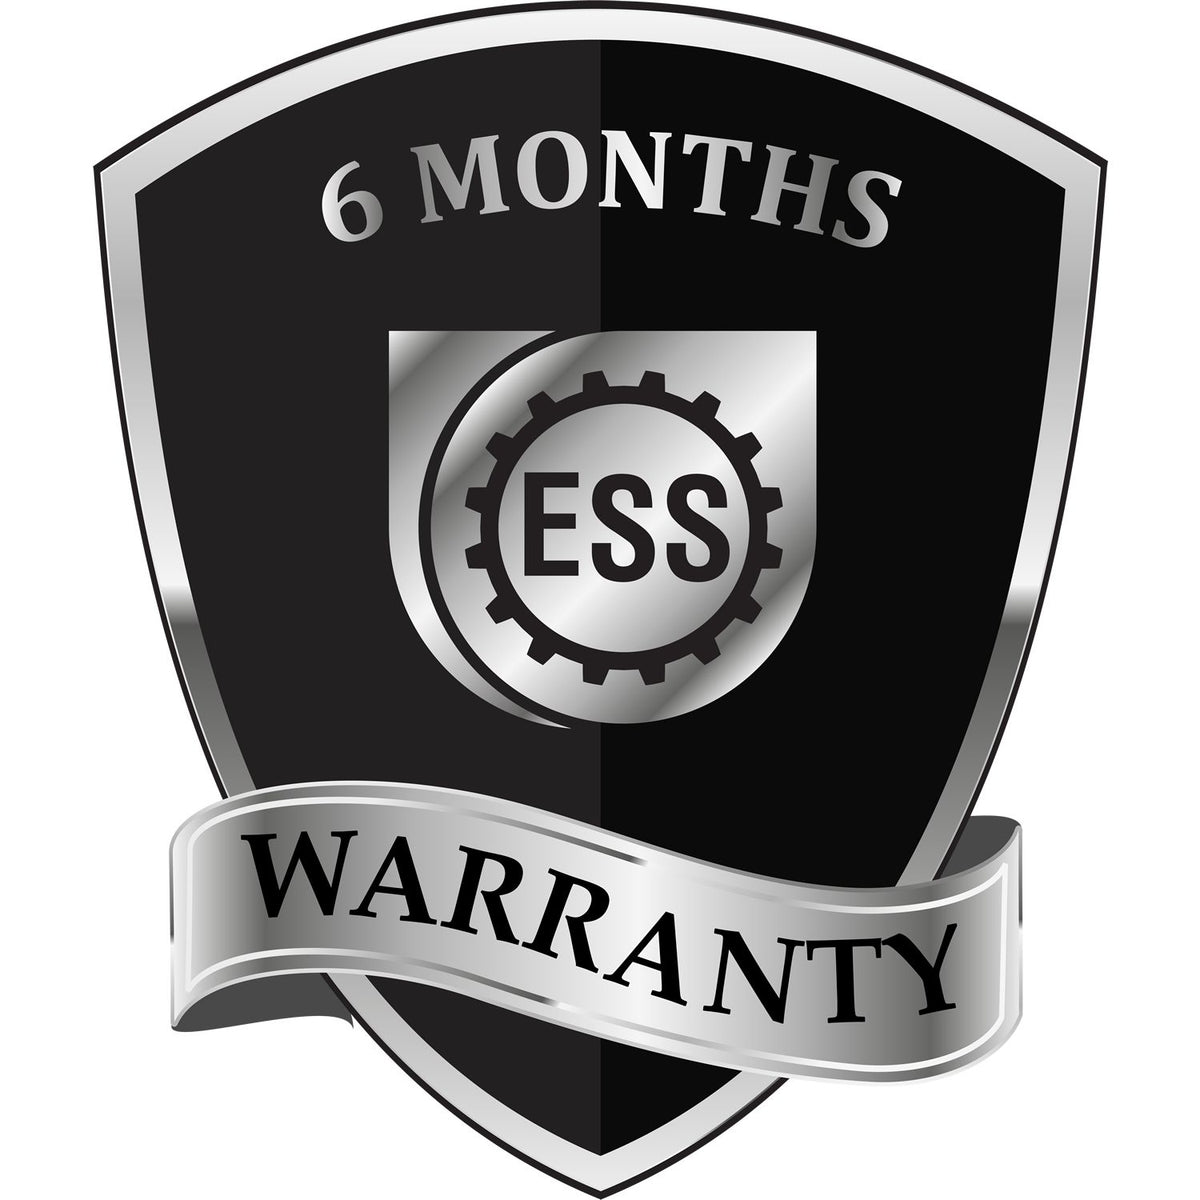 A black and silver badge or emblem showing warranty information for the Slim Pre-Inked Montana Professional Geologist Seal Stamp